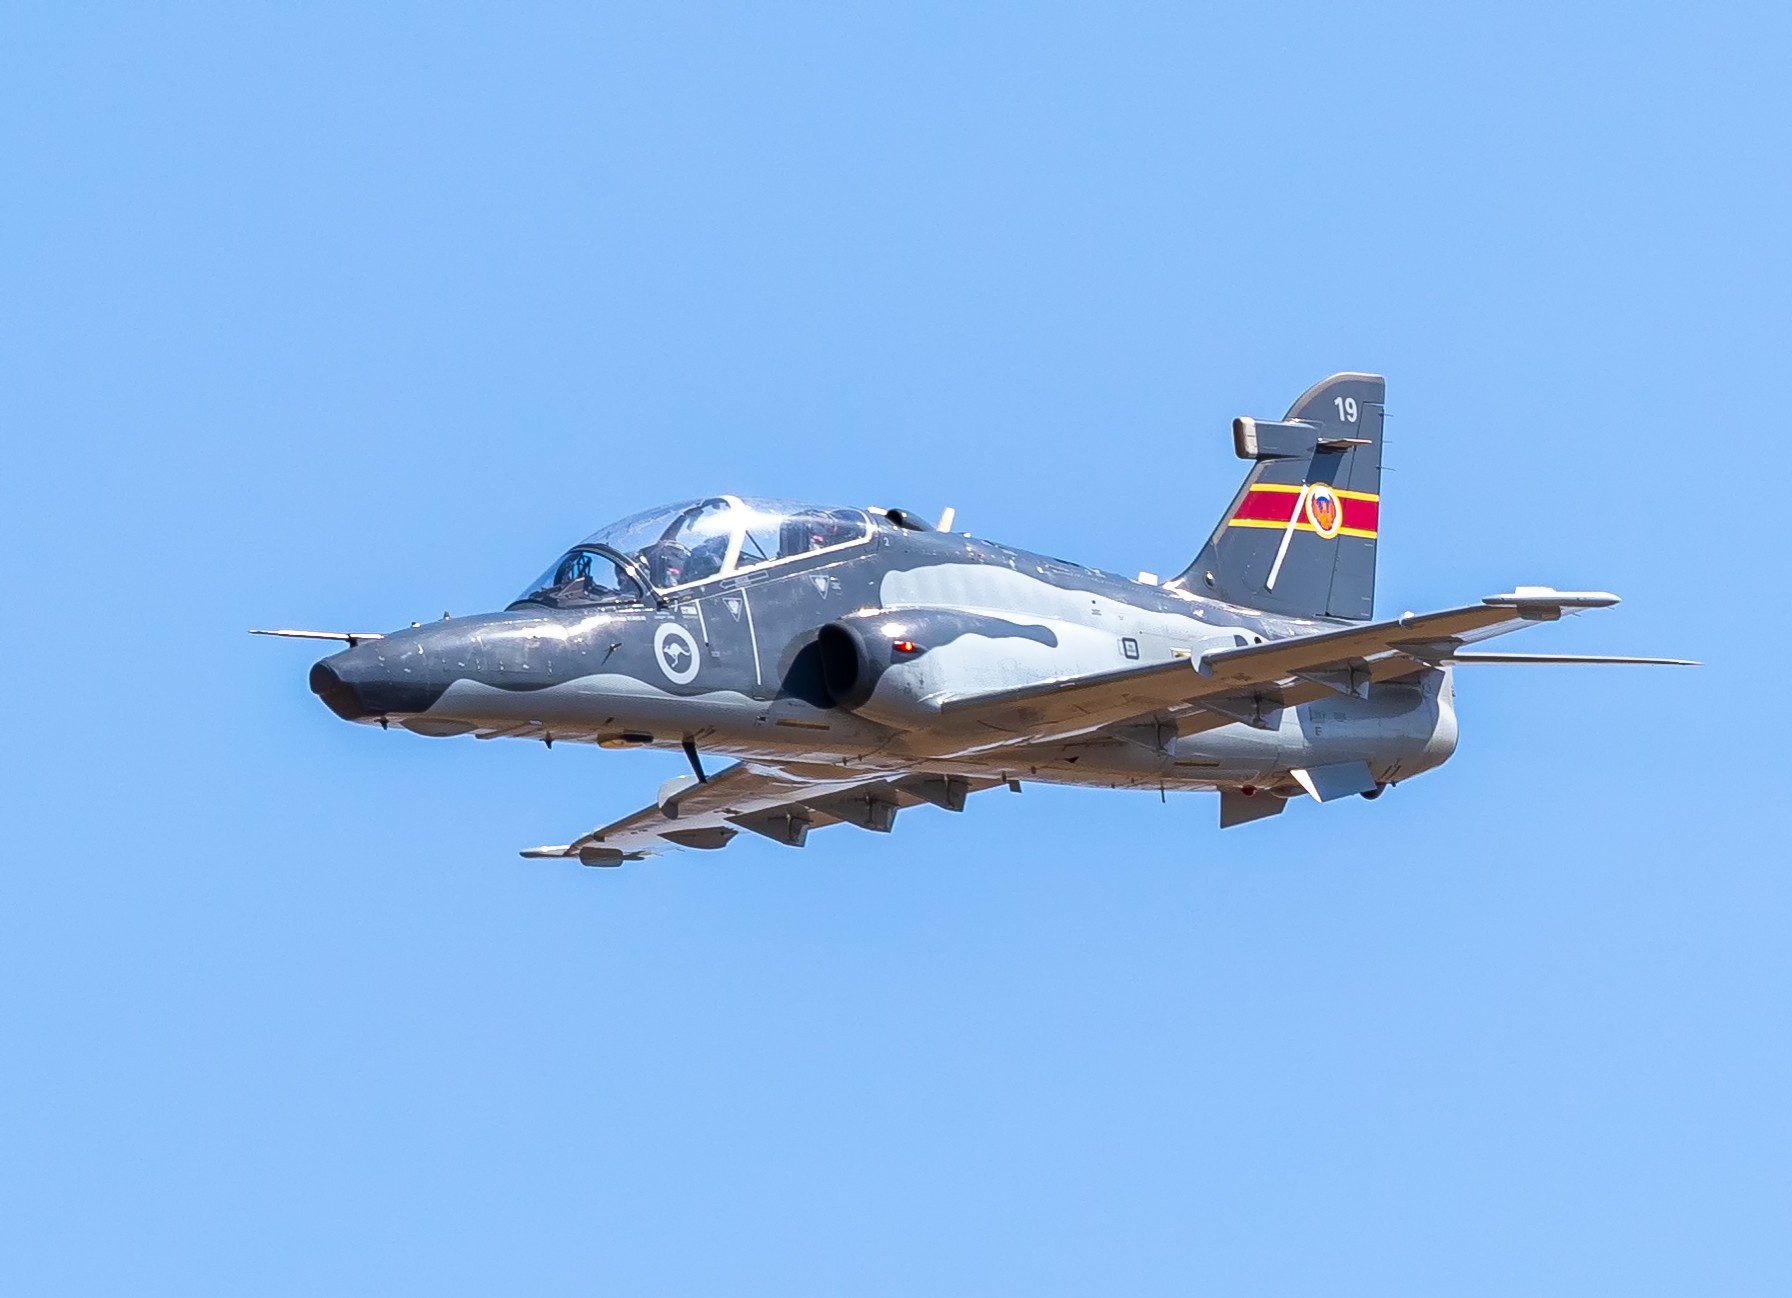 BAE Systems Hawk 127 lead-in fighter